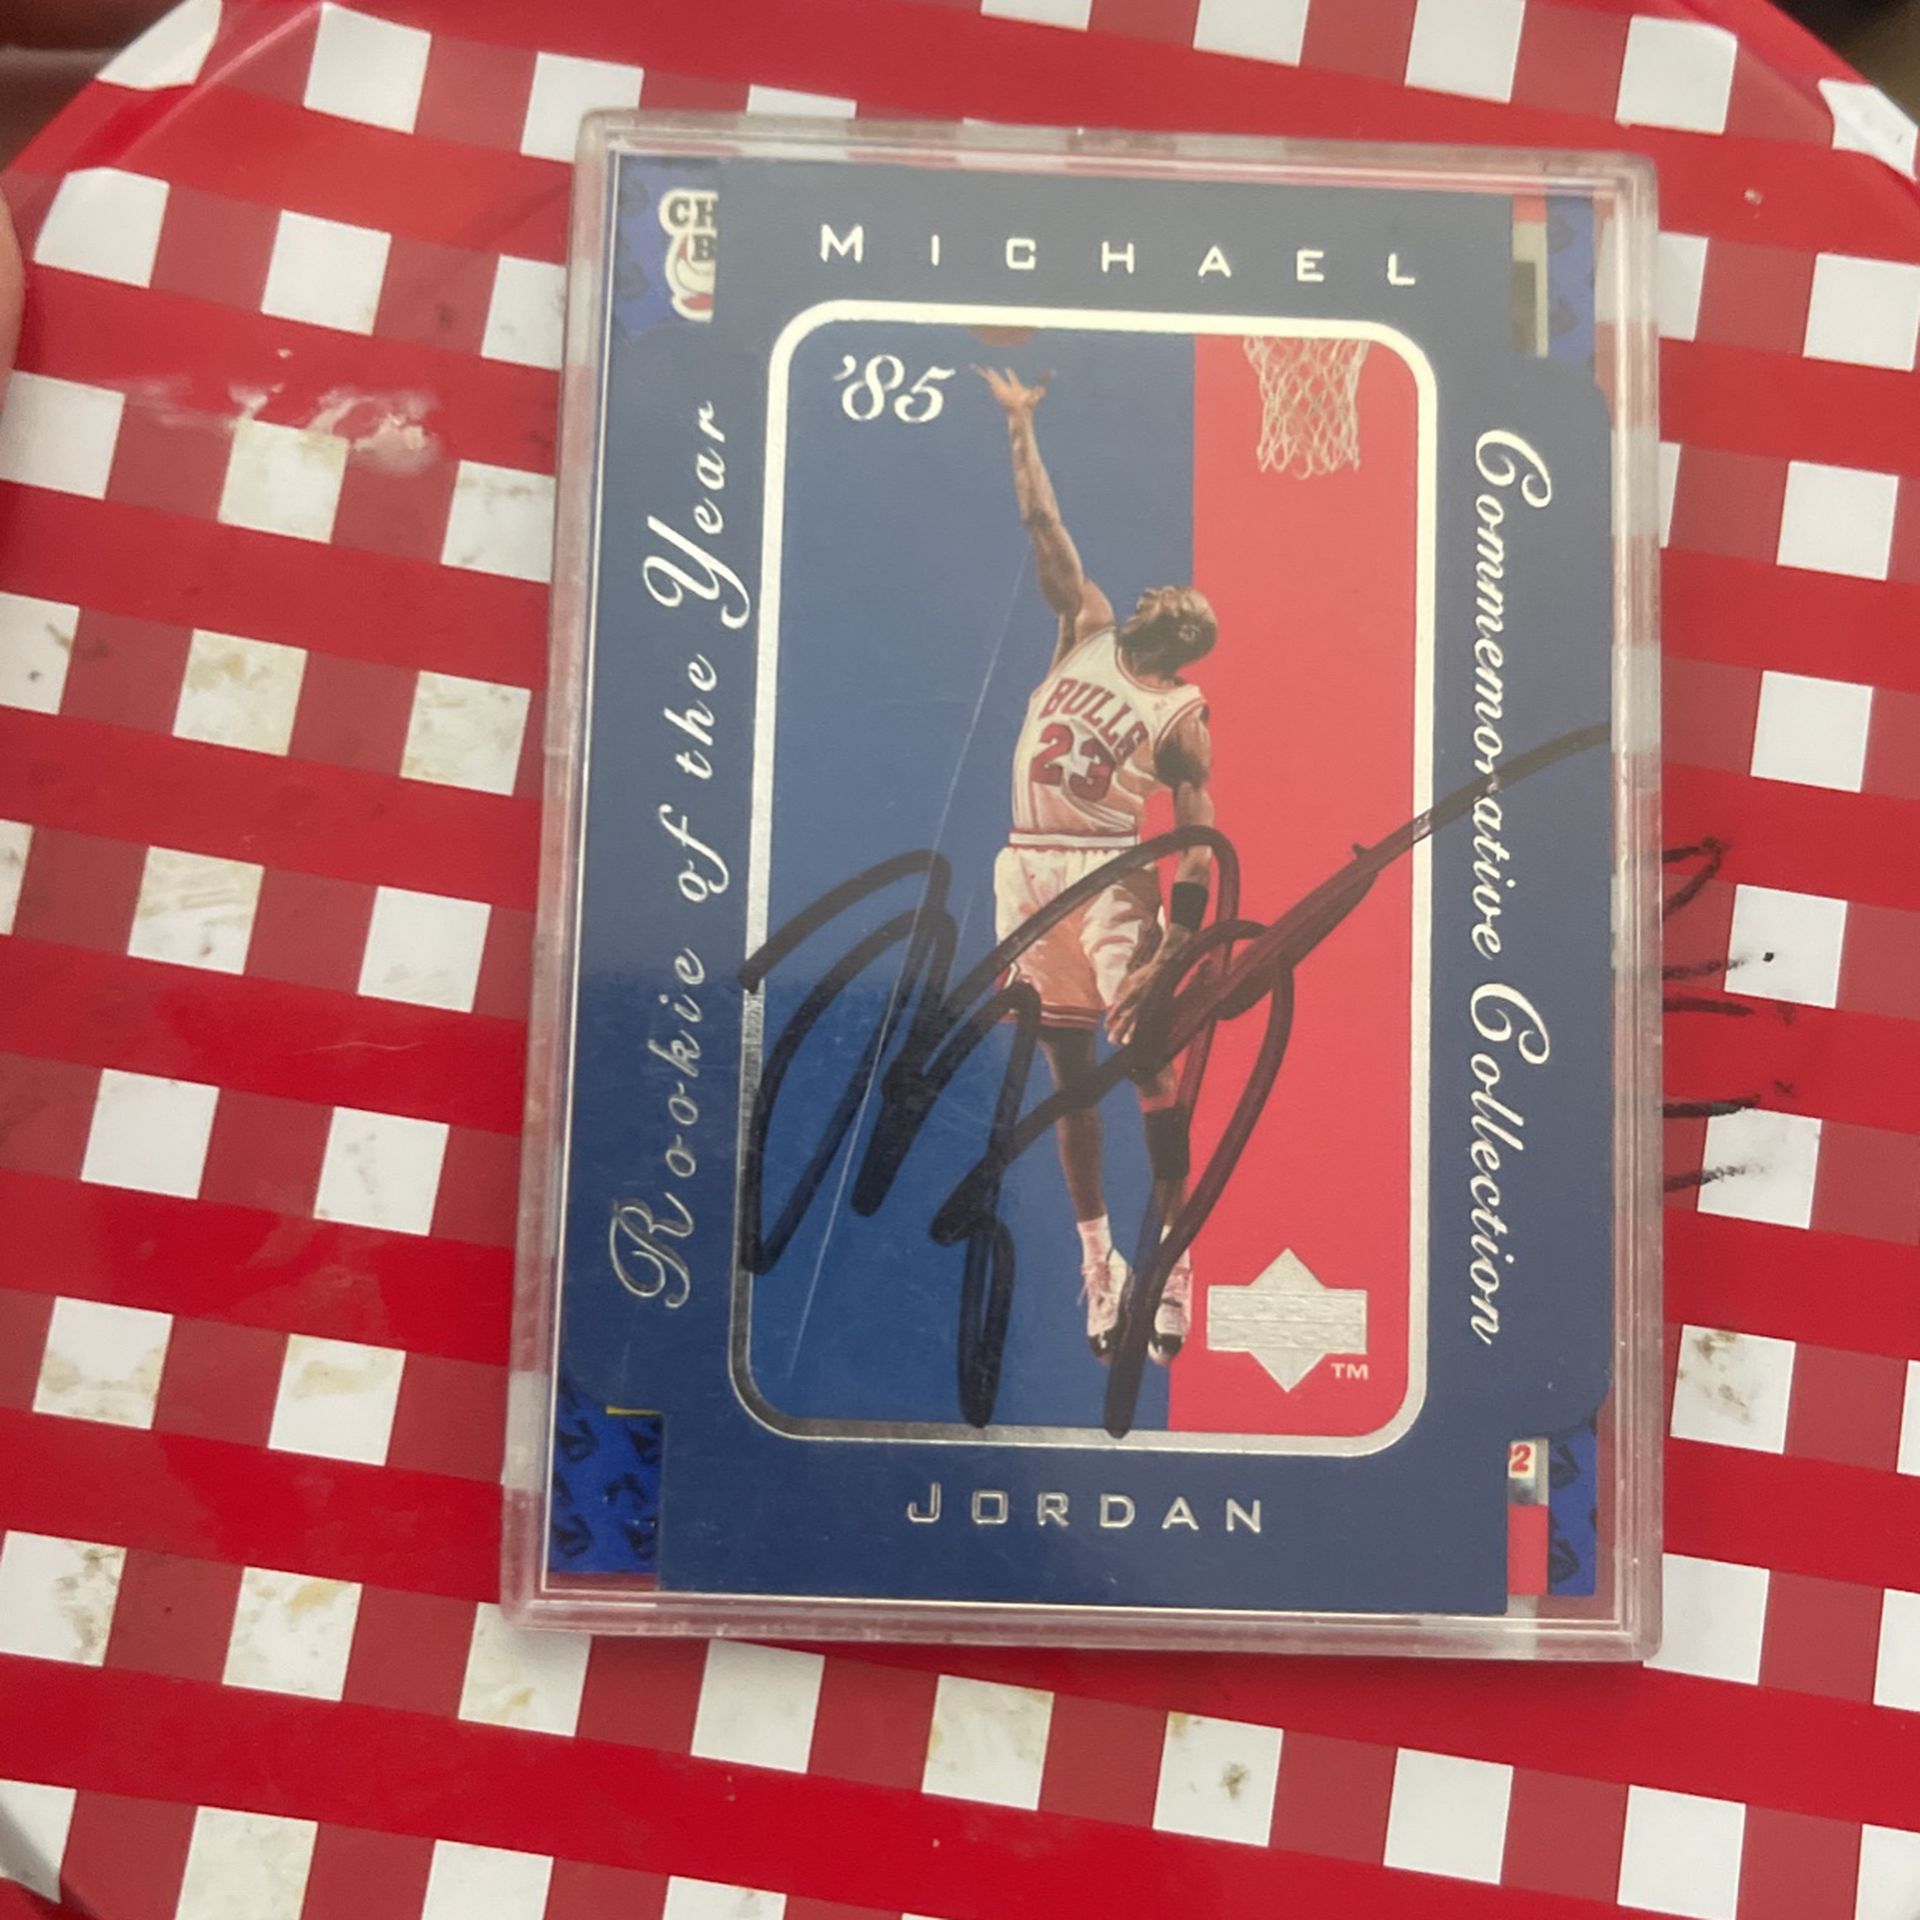 Michael Jordan Autographed Rookie of the year 85 